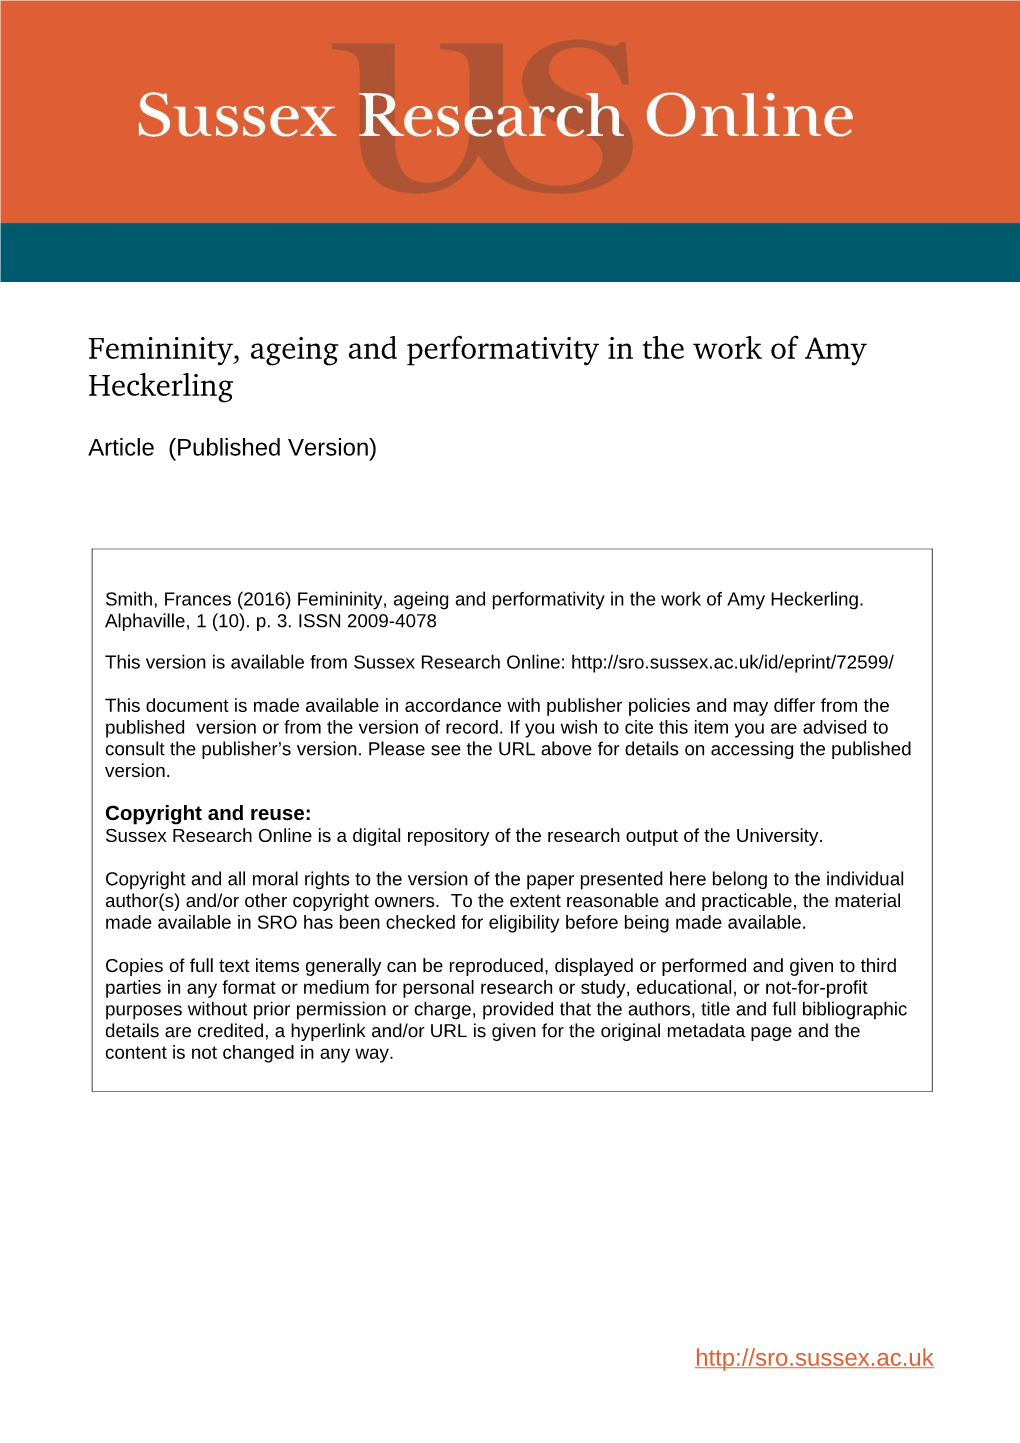 Femininity, Ageing and Performativity in the Work of Amy Heckerling